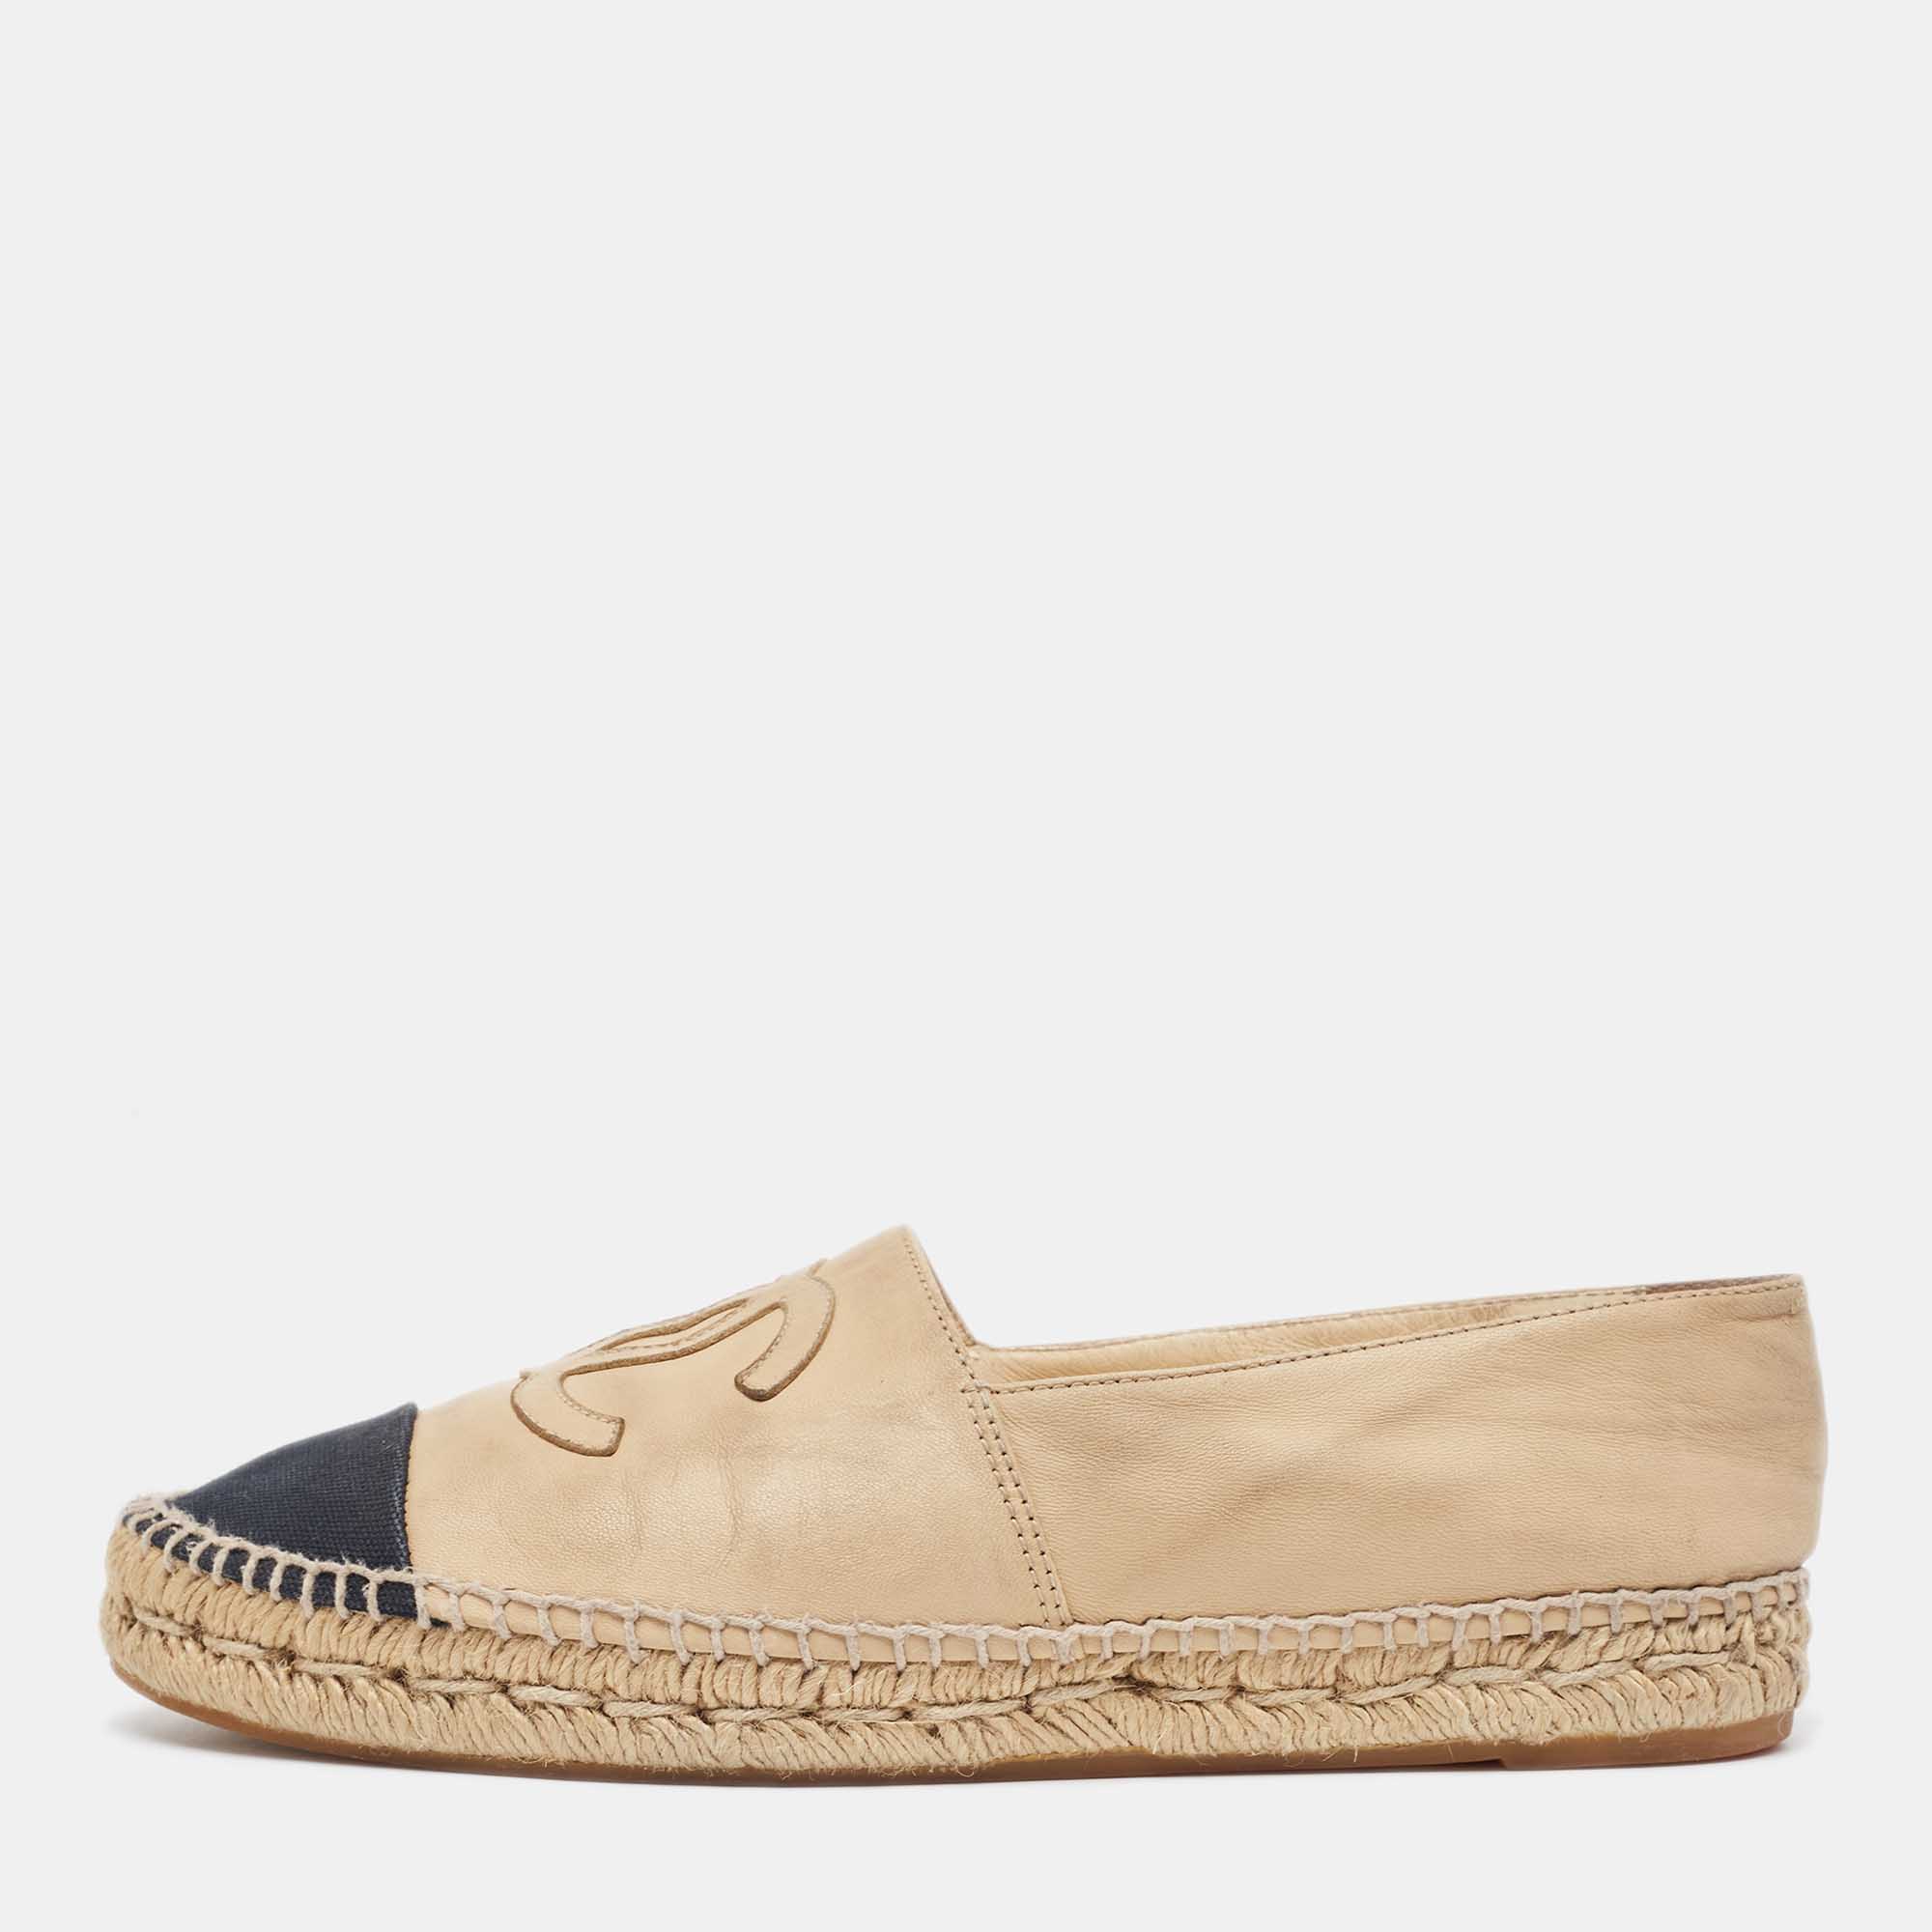 Chanel beige/black canvas and leather cc espadrille flats size 41